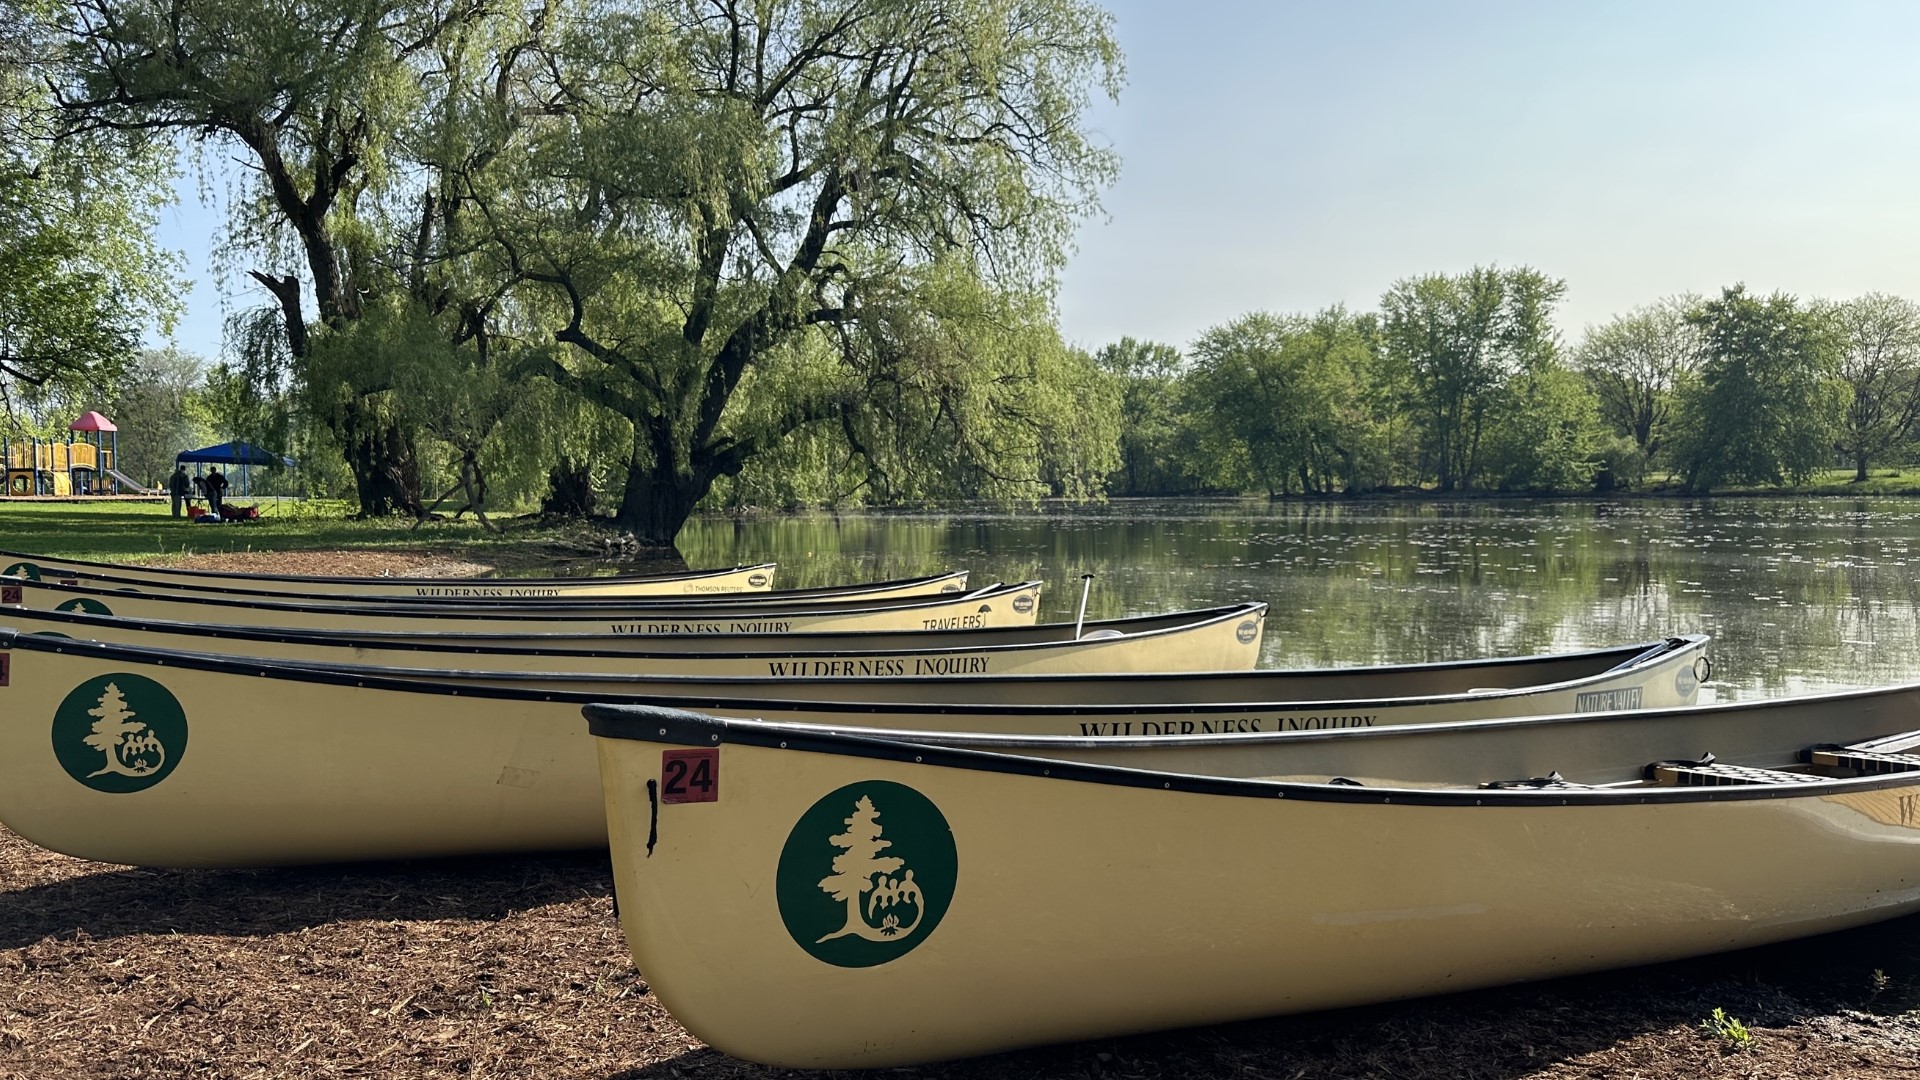 8th graders from Grand Rapids Public Schools will take the classroom outside this week, as the 5th annual 'Canoemobile Paddling Experience' event kicks off.